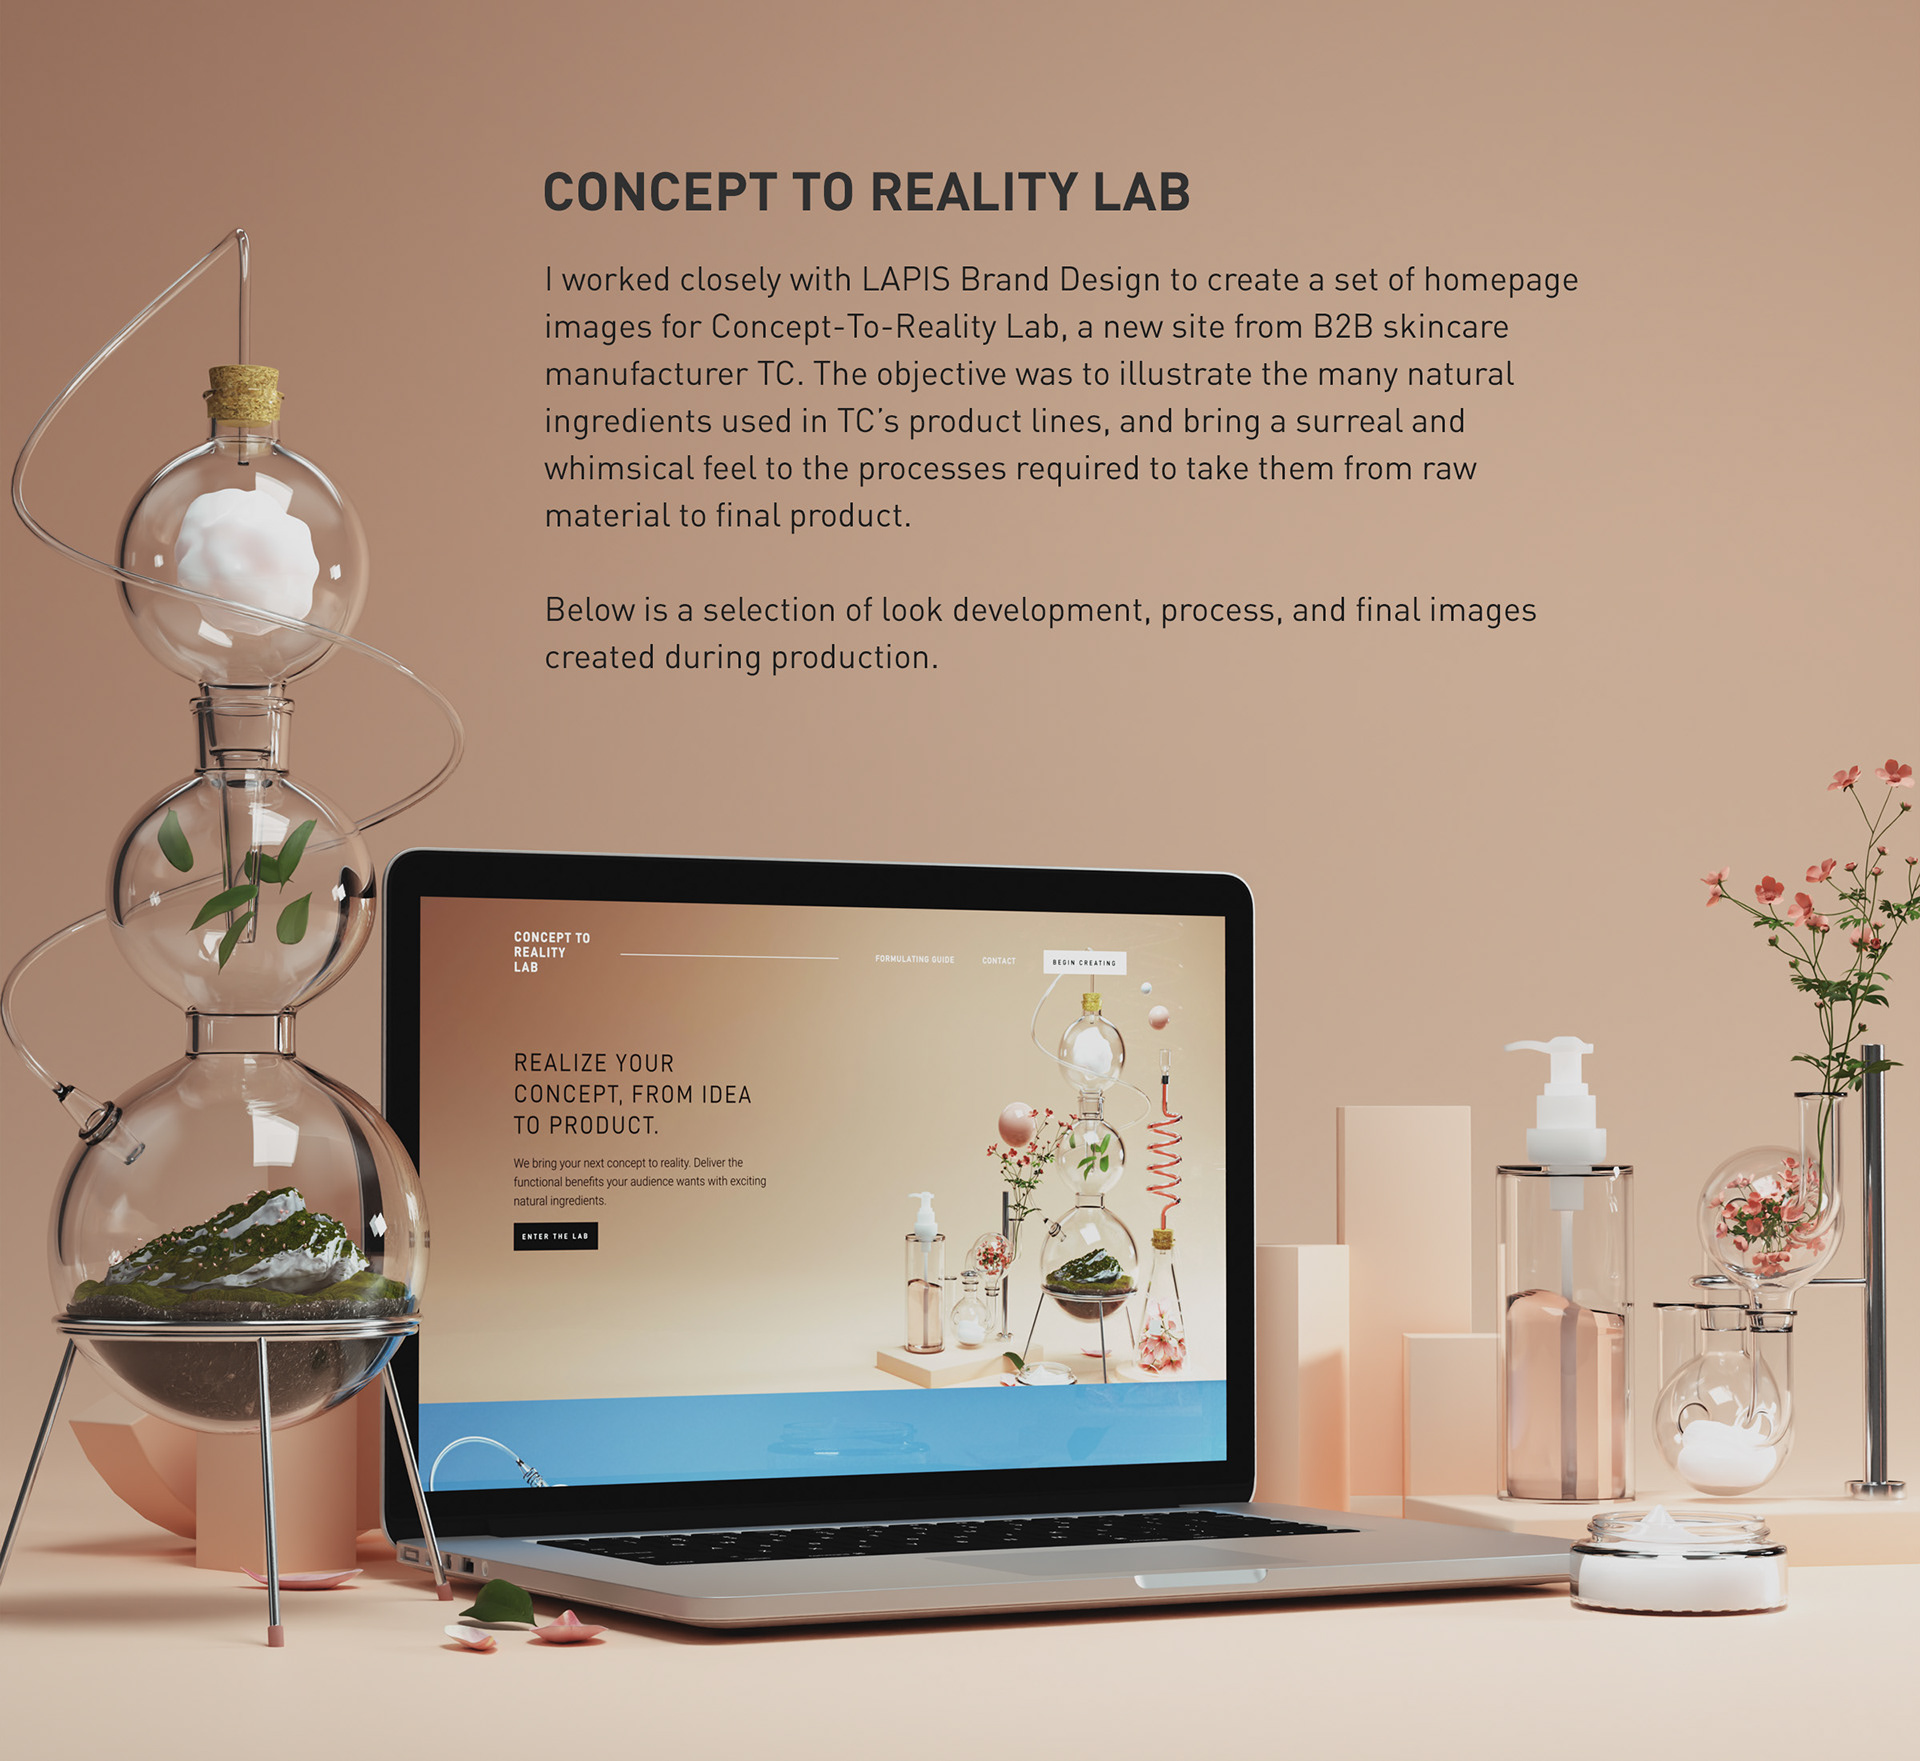 Concept To Reality Lab | TC on Behance077d2d88209151.5dcf122dd2952.jpg